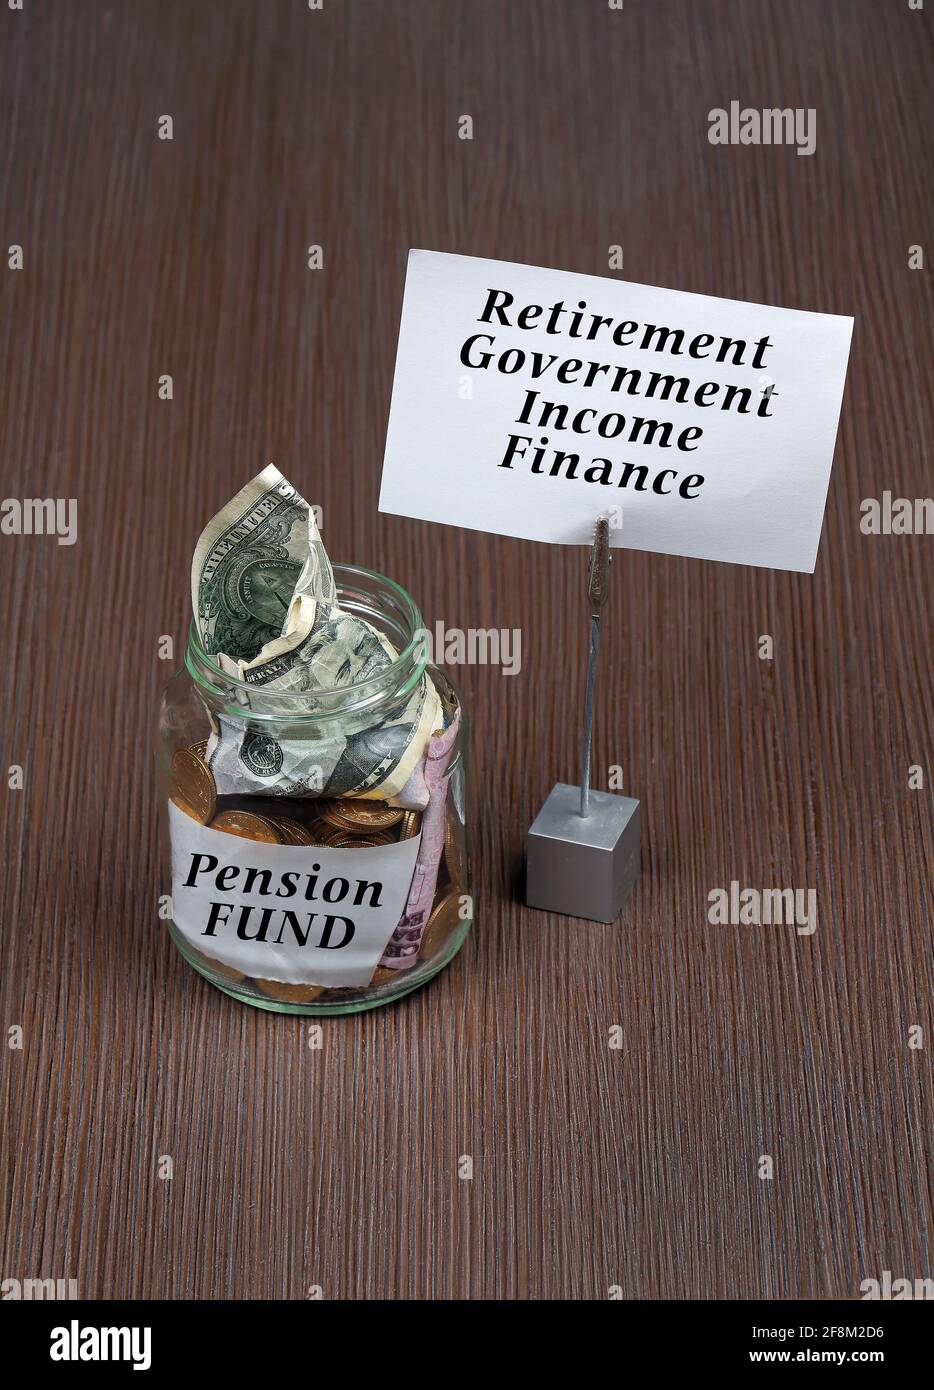 Glass jar with money inside for pension retirement fund Stock Photo